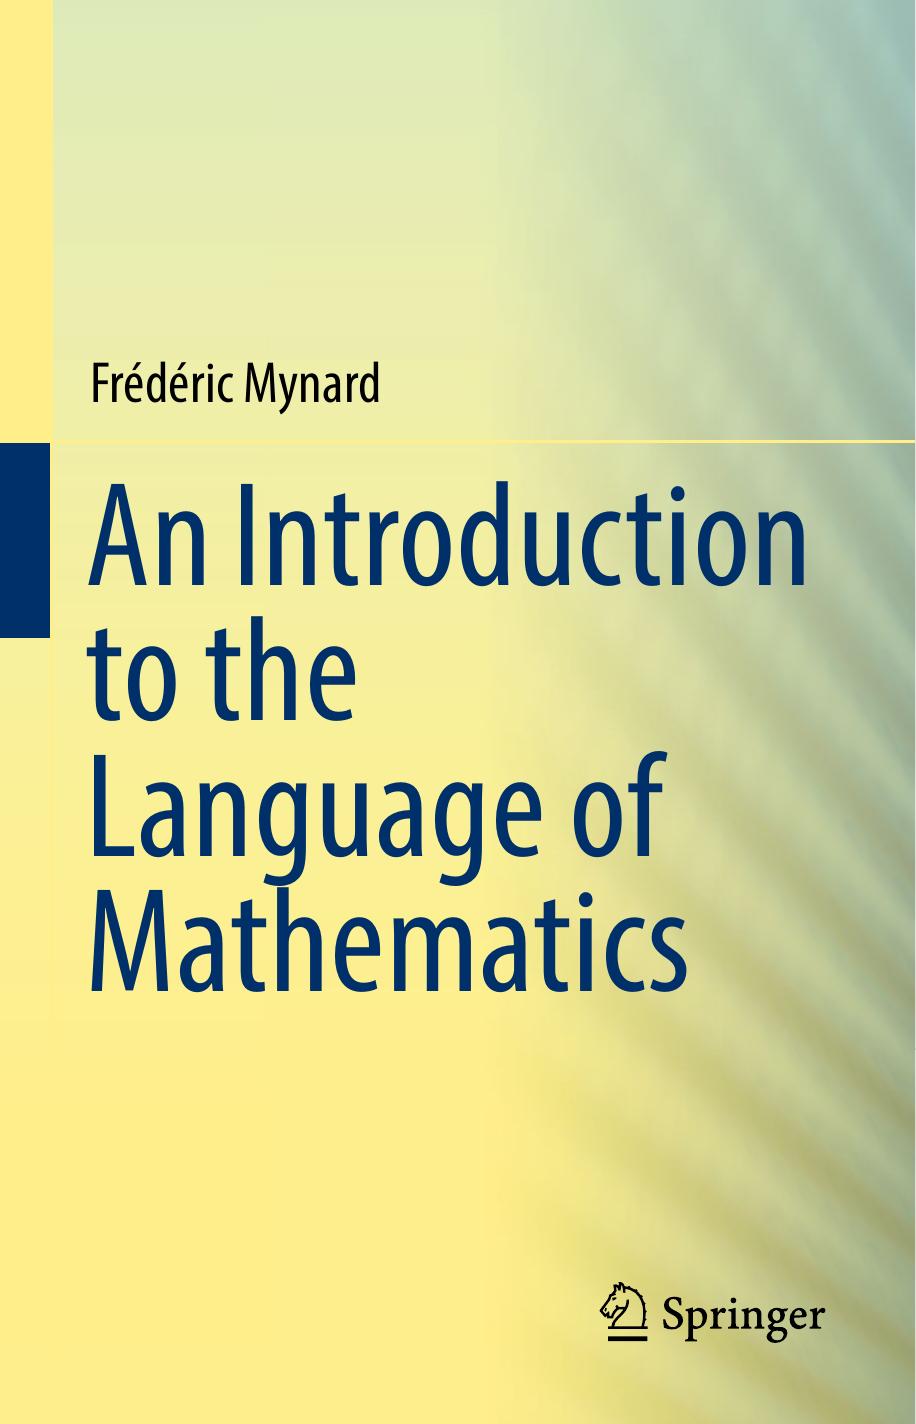 An Introduction to the Language of Mathematics